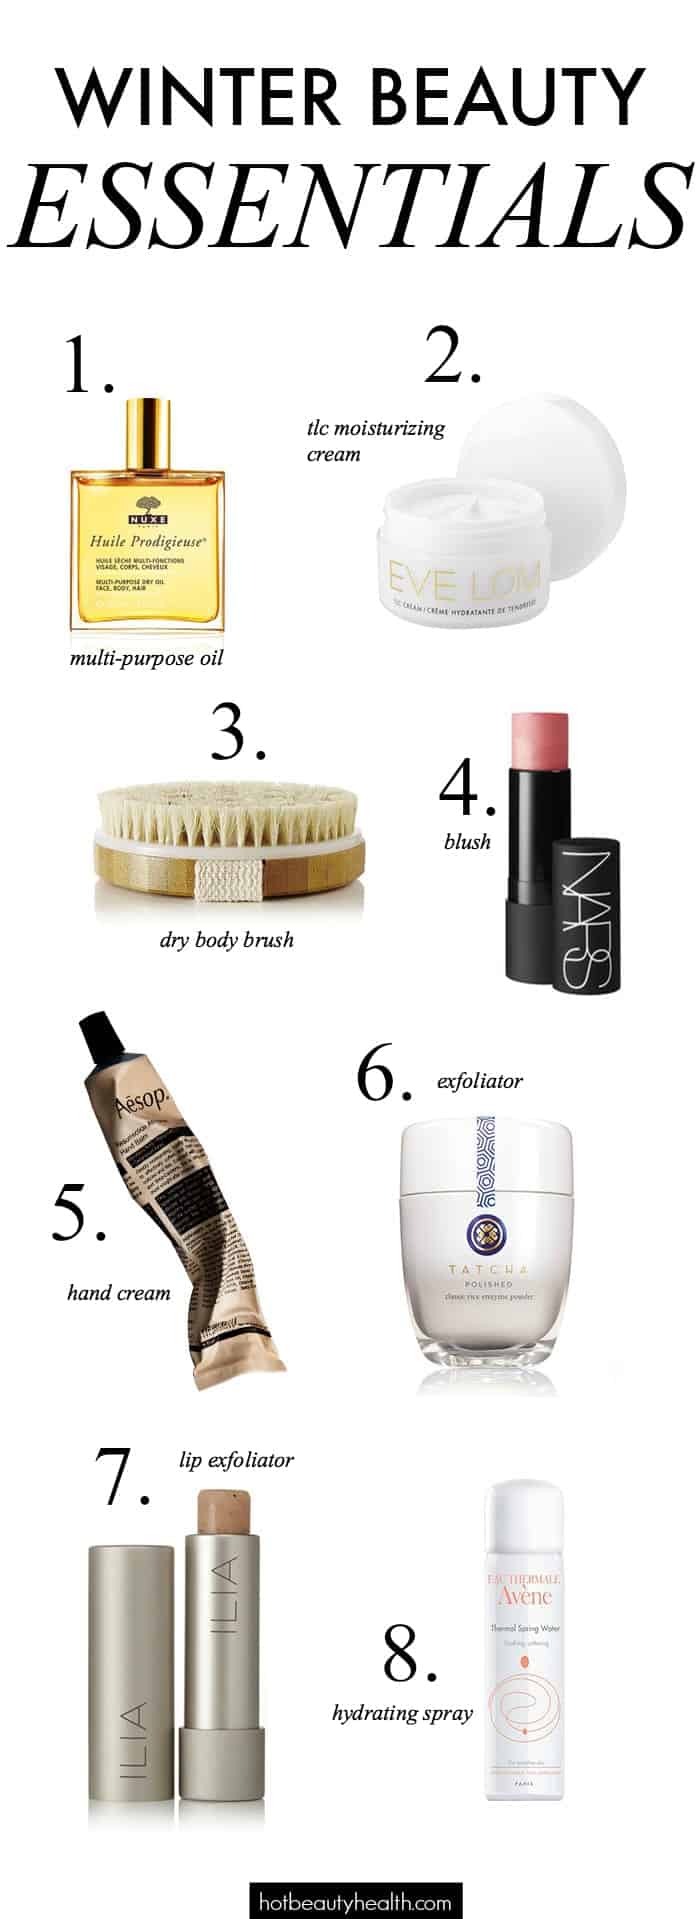 8 Winter Beauty Essentials You Can’t Survive Without